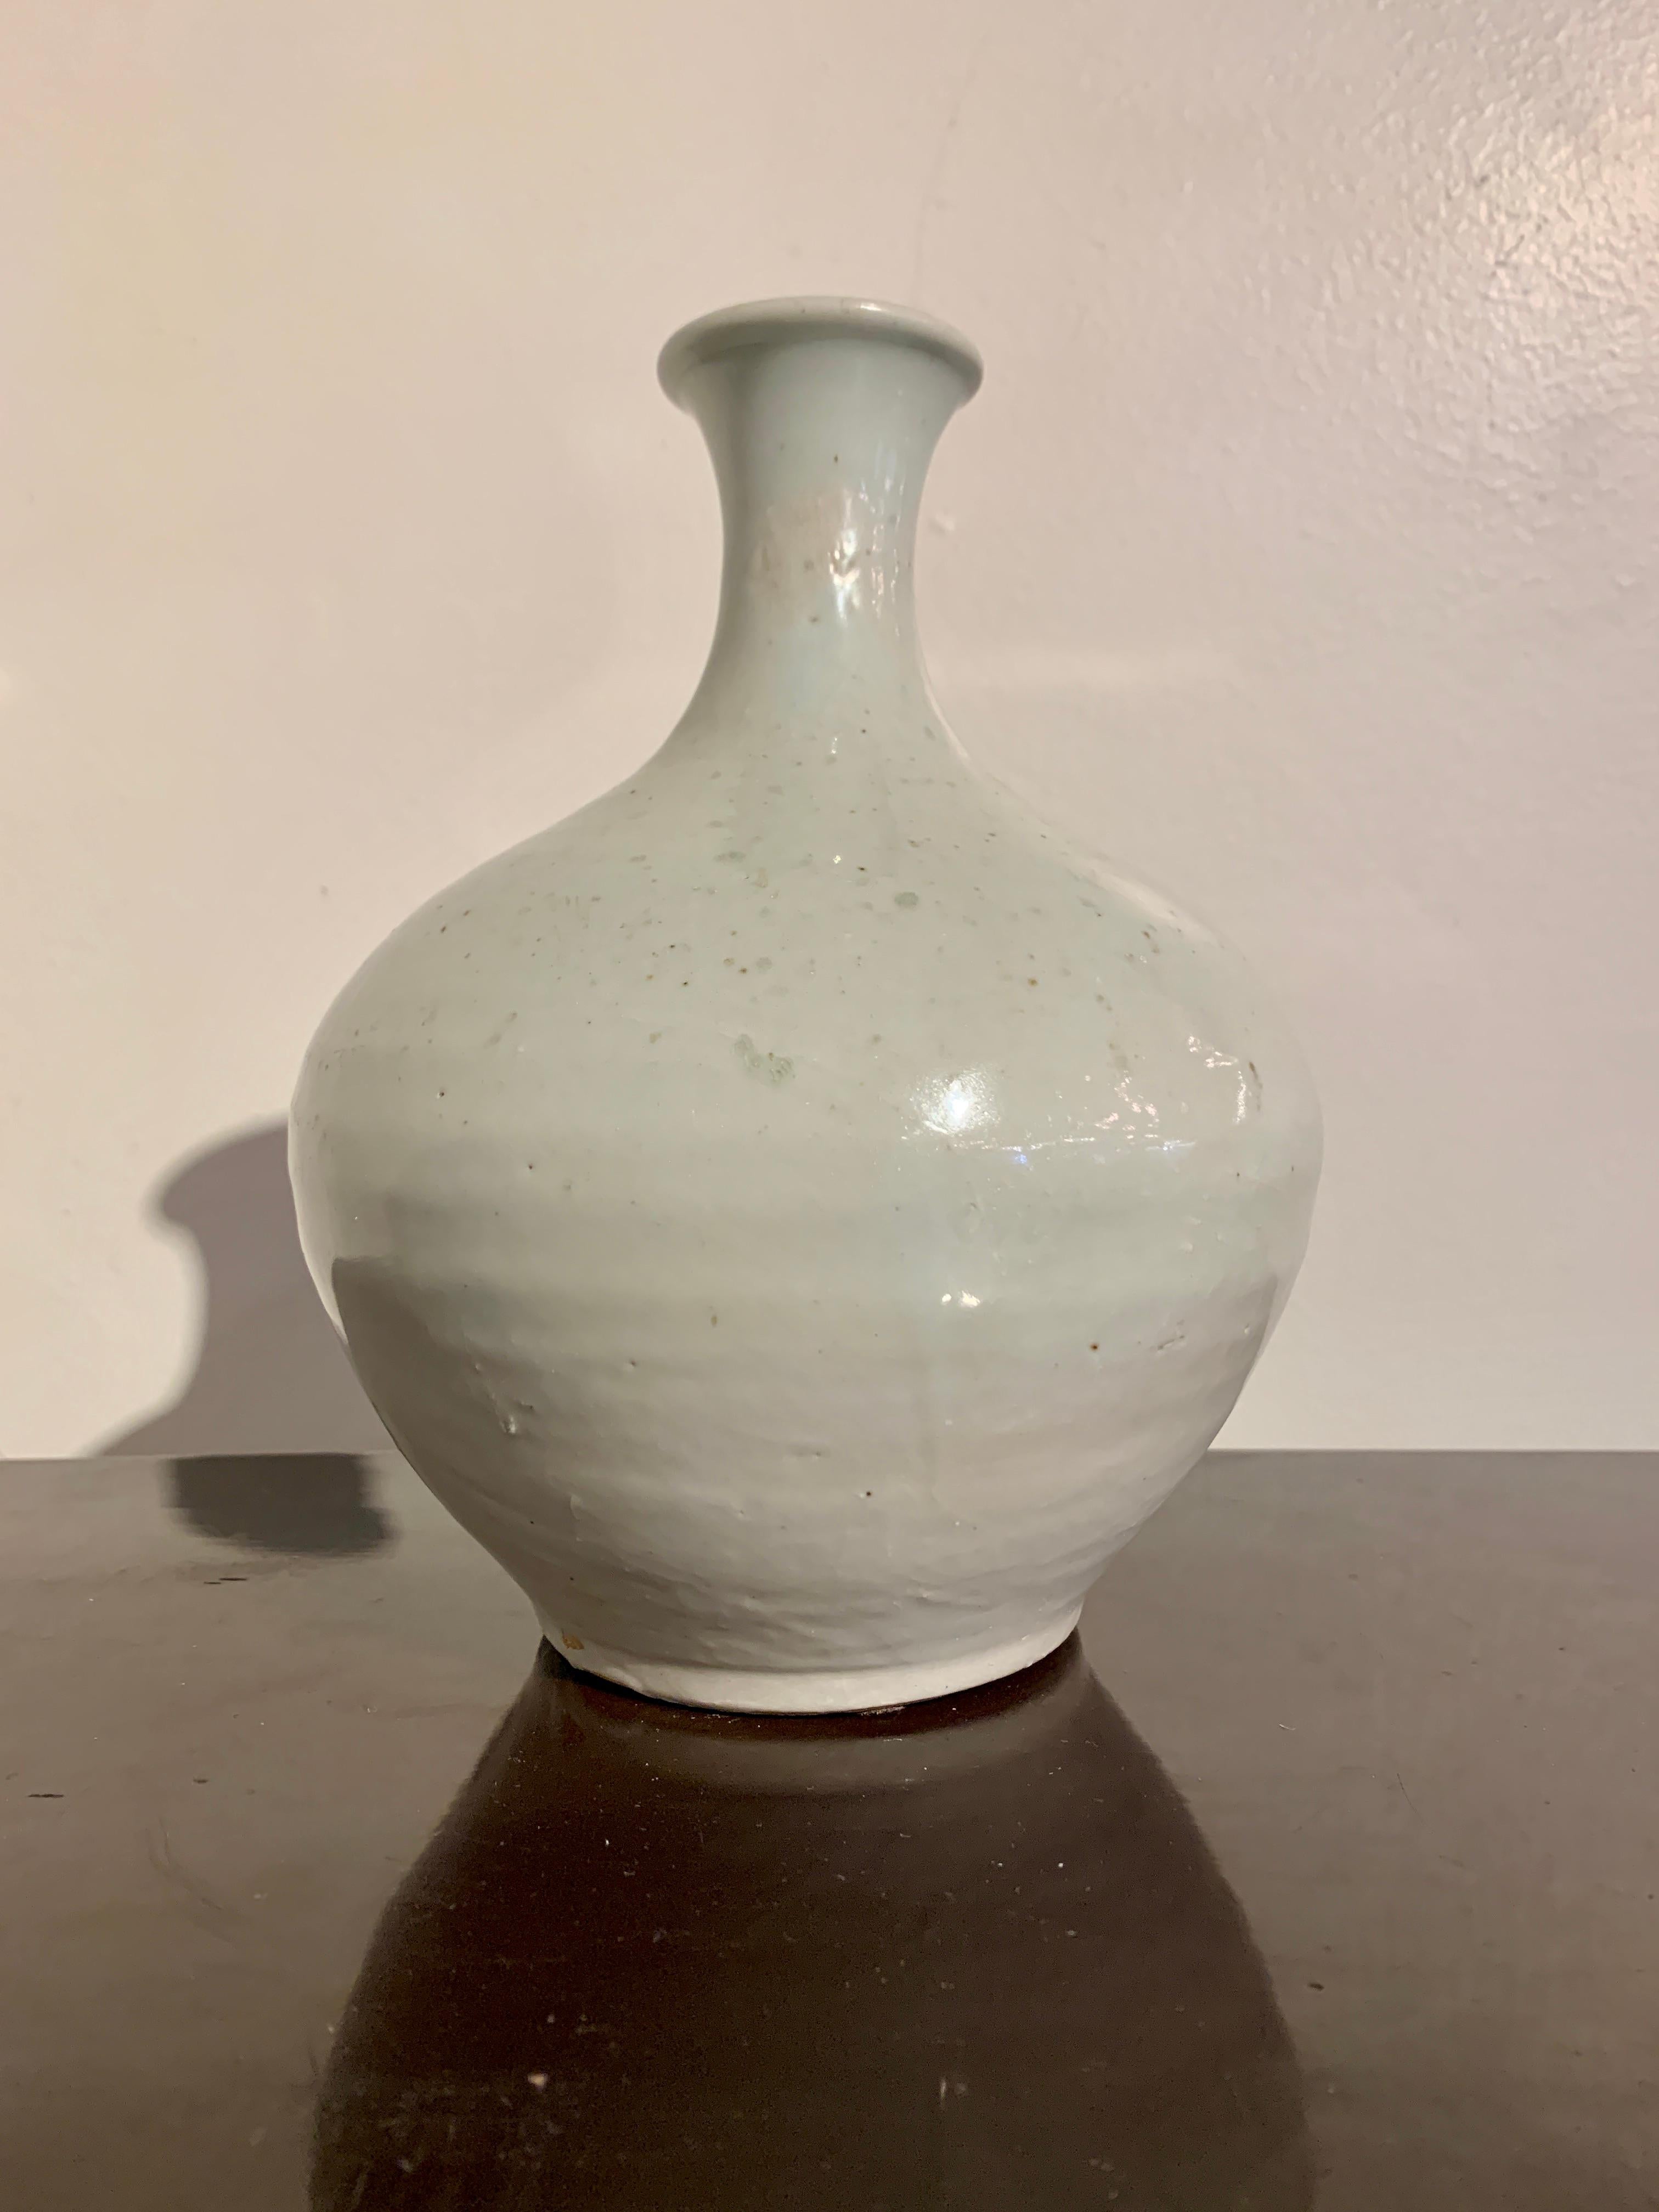 A subtle and elegant Korean Joseon Dynasty white glazed porcelain bottle vase, 19th century, Korea.

The bottle vase with an unusual globular body, narrow neck and slightly everted mouth, all set on a short ring foot. The vase heavily potted and